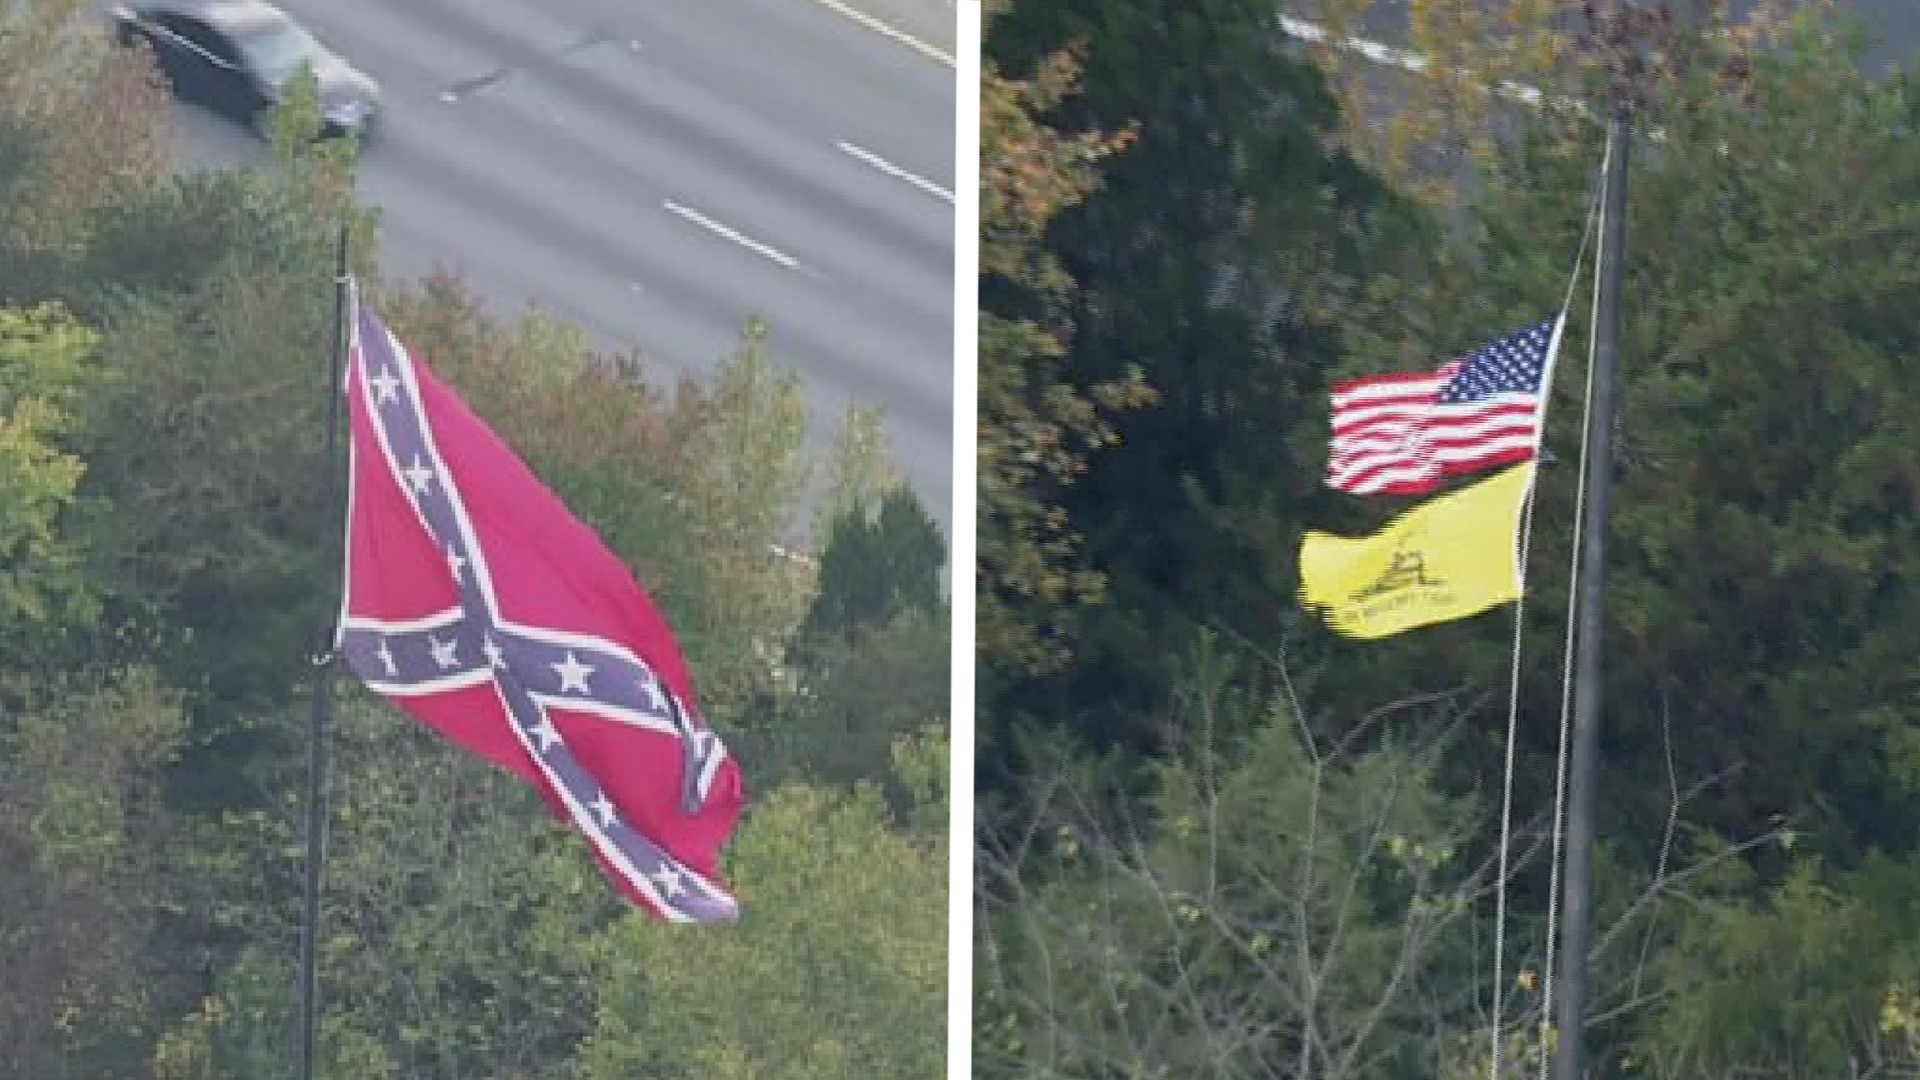 Virginia's Department of Transportation removed a large confederate flag along I-95.